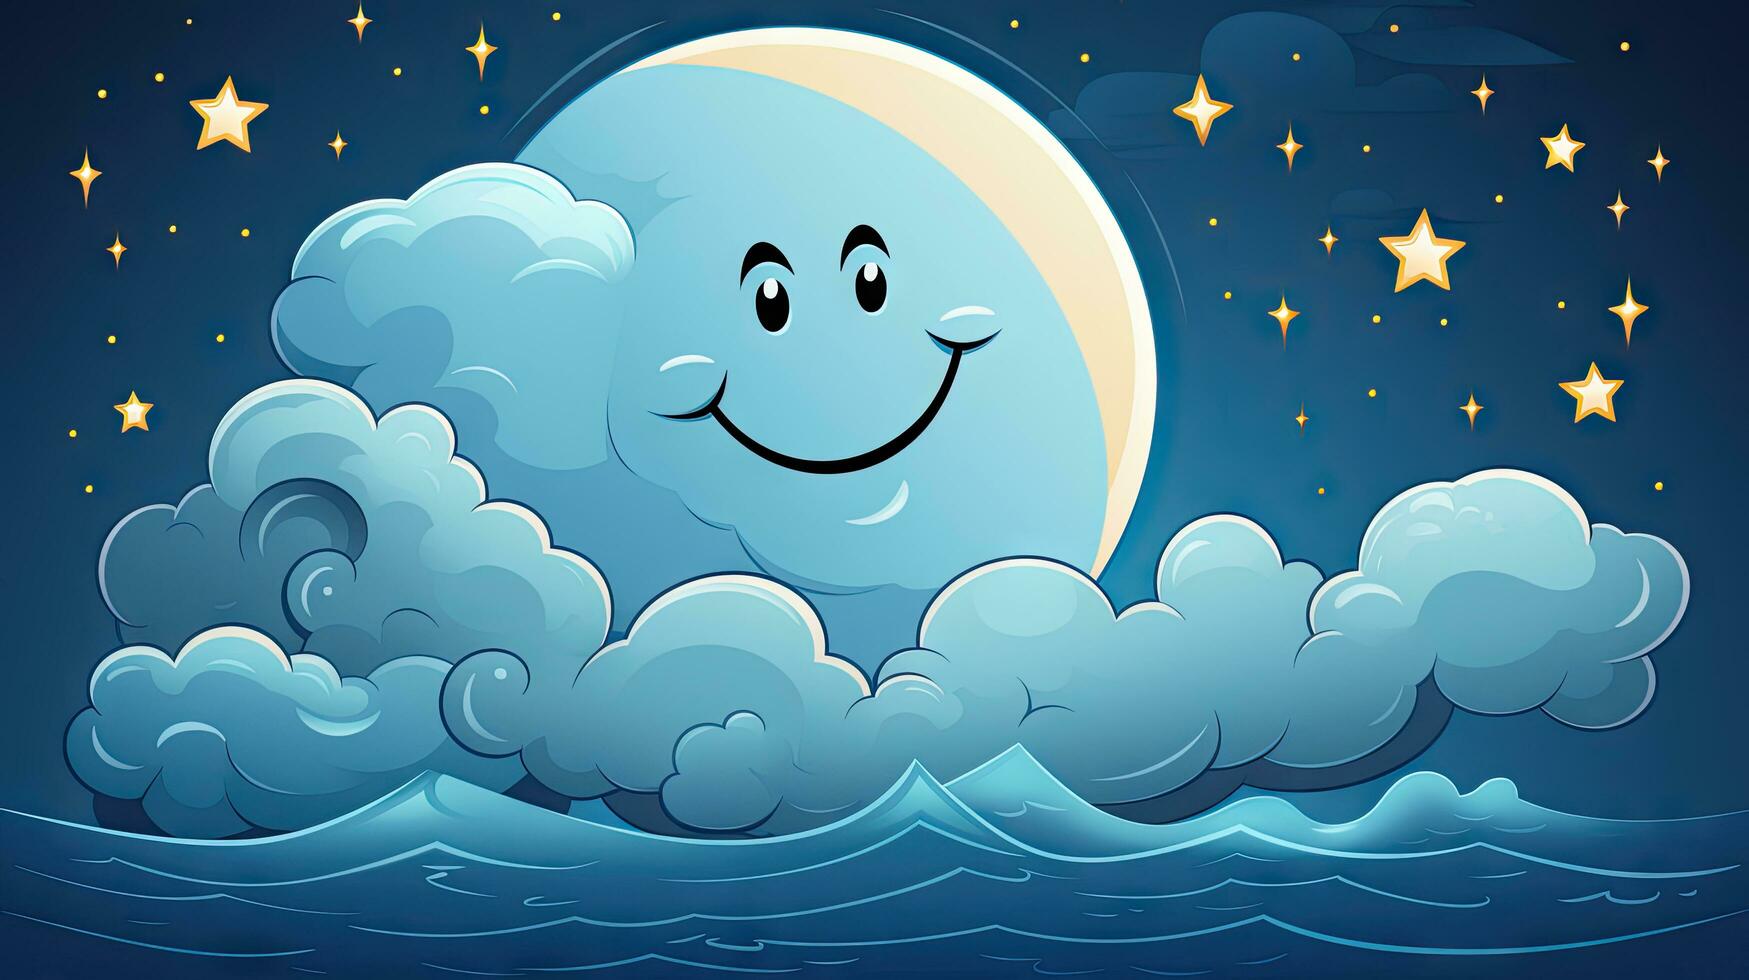 Cute cartoon moon and clouds in the night sky. Vector illustration photo